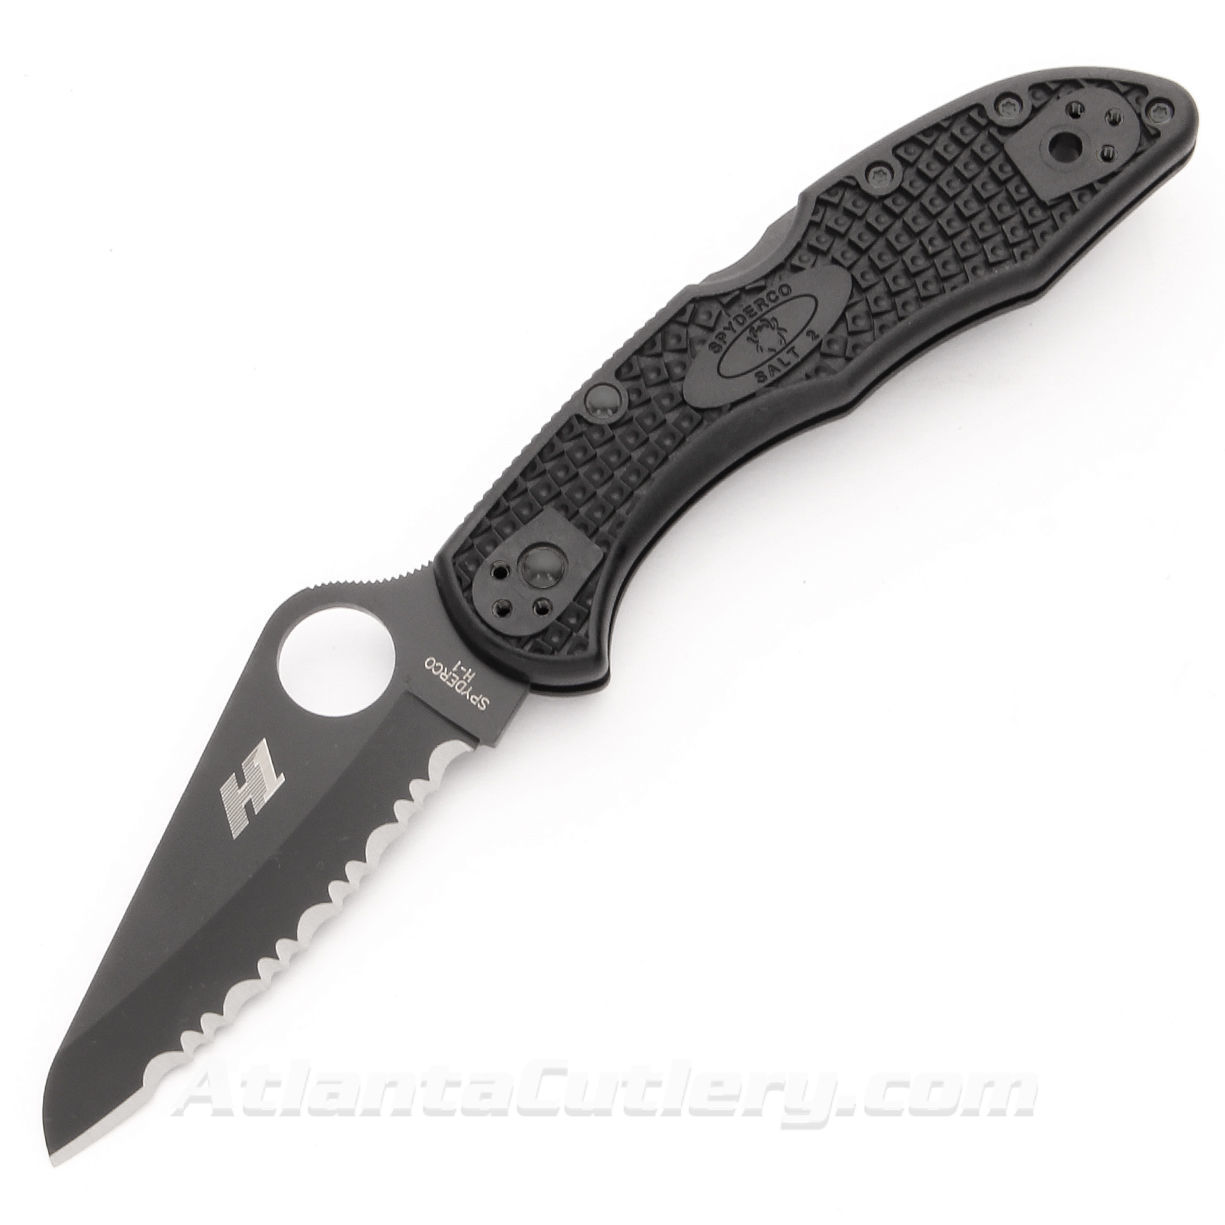 lightweight Spyderco Salt 2 tactical knife has serrated H-1 steel with non-reflective coating, ambidextrous, one-handed opening